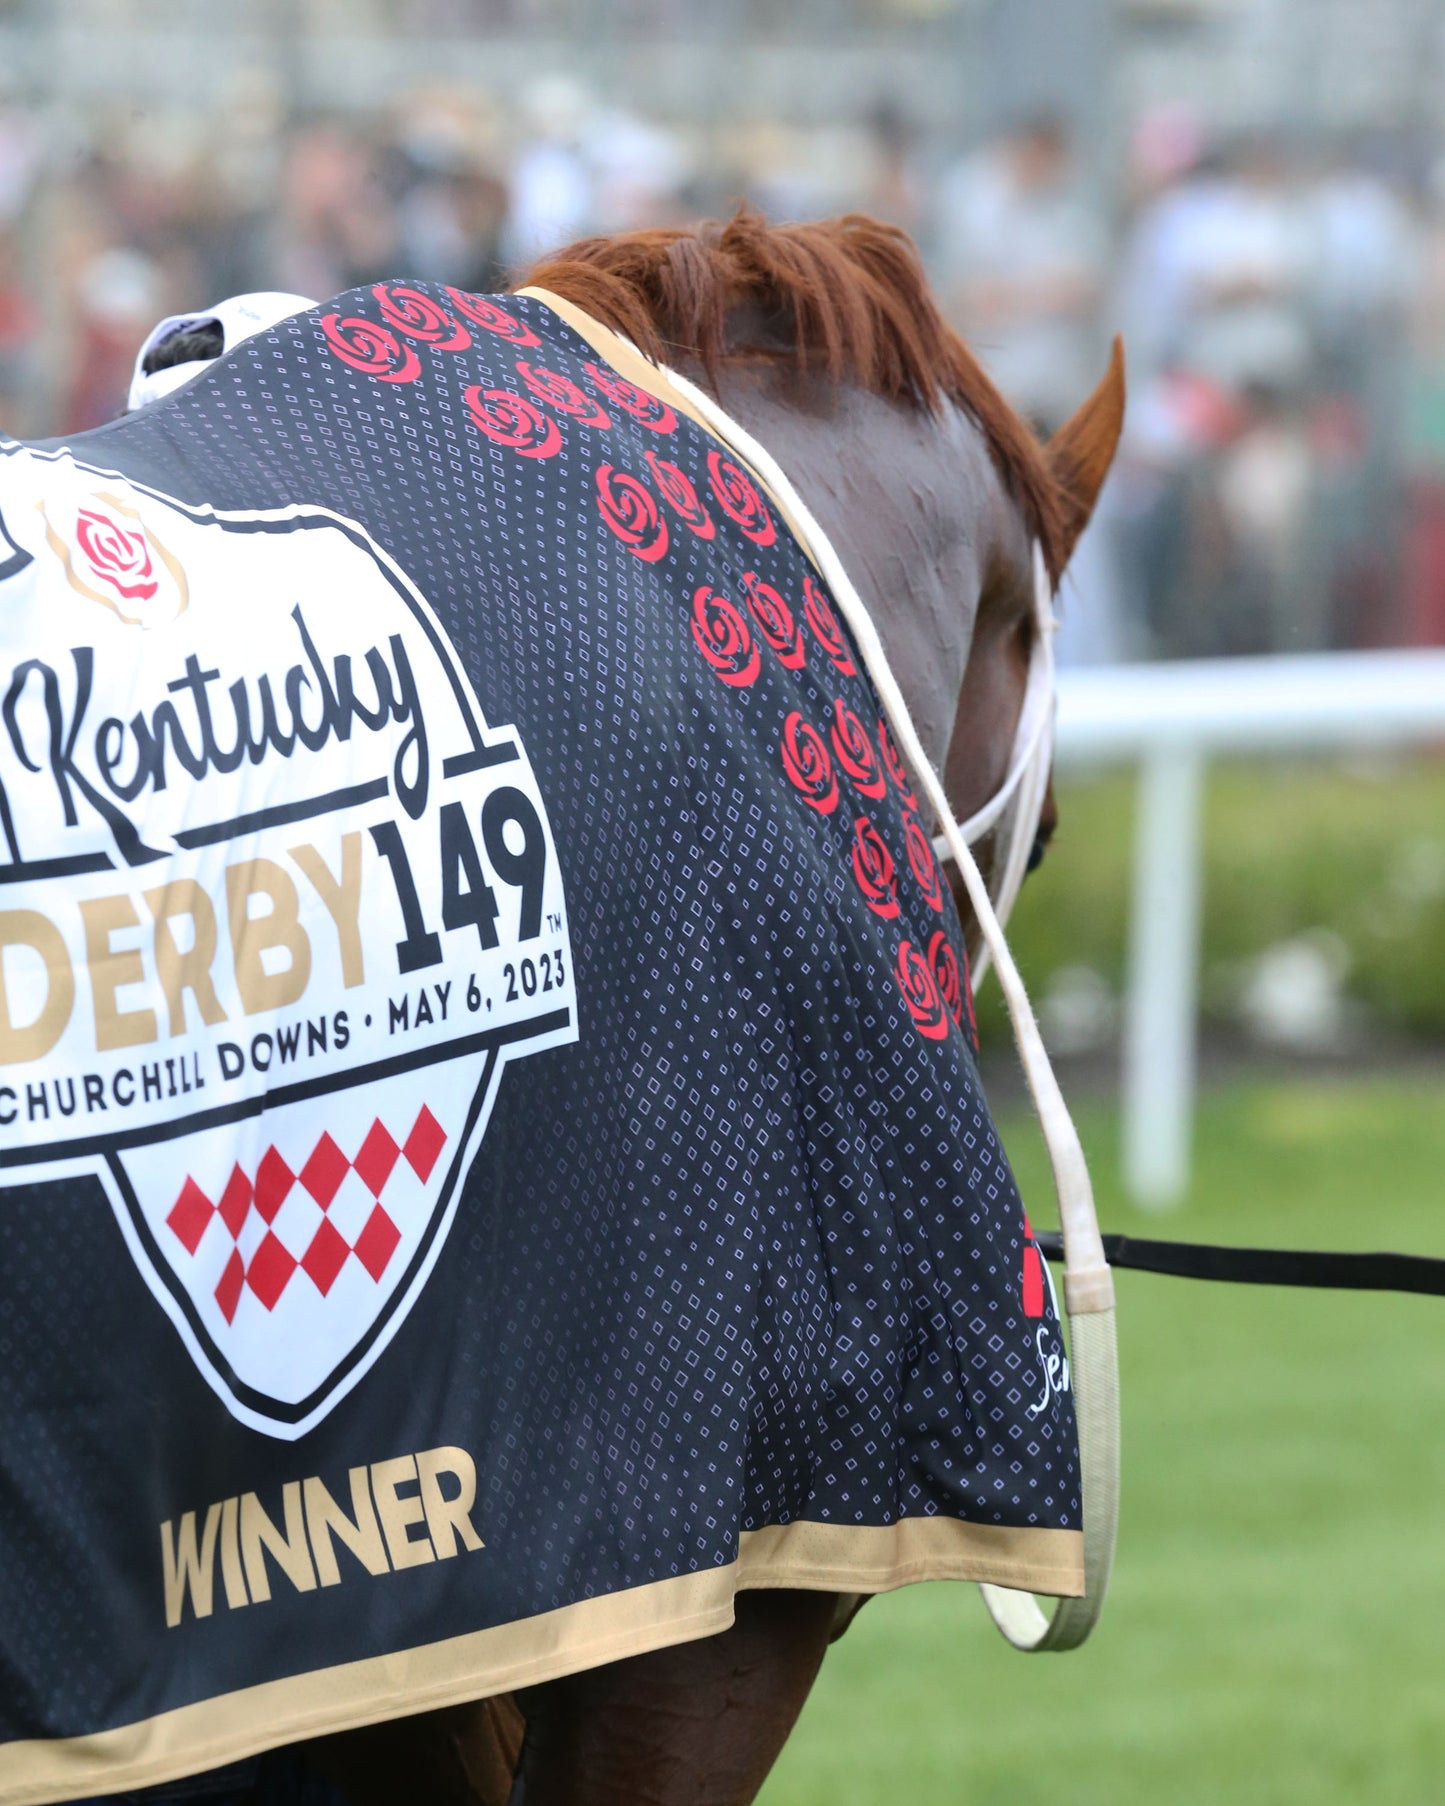 MAGE - The Kentucky Derby - 149th Running - 05-06-23 - R12 - Churchill Downs - Saddle Towel 02